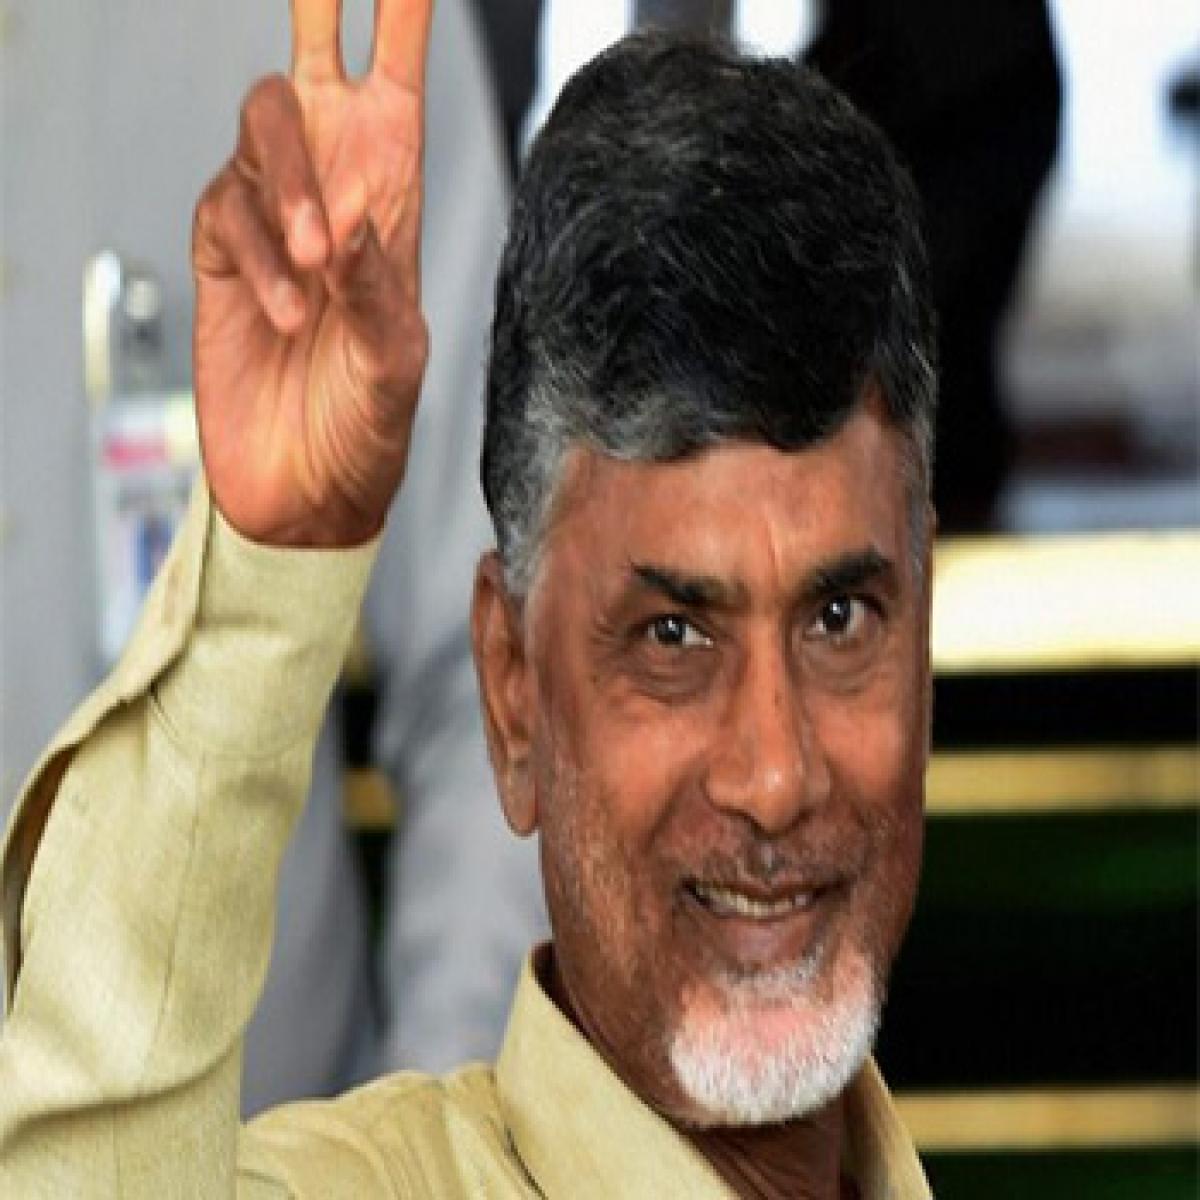 TDP offers perks to keep flock together